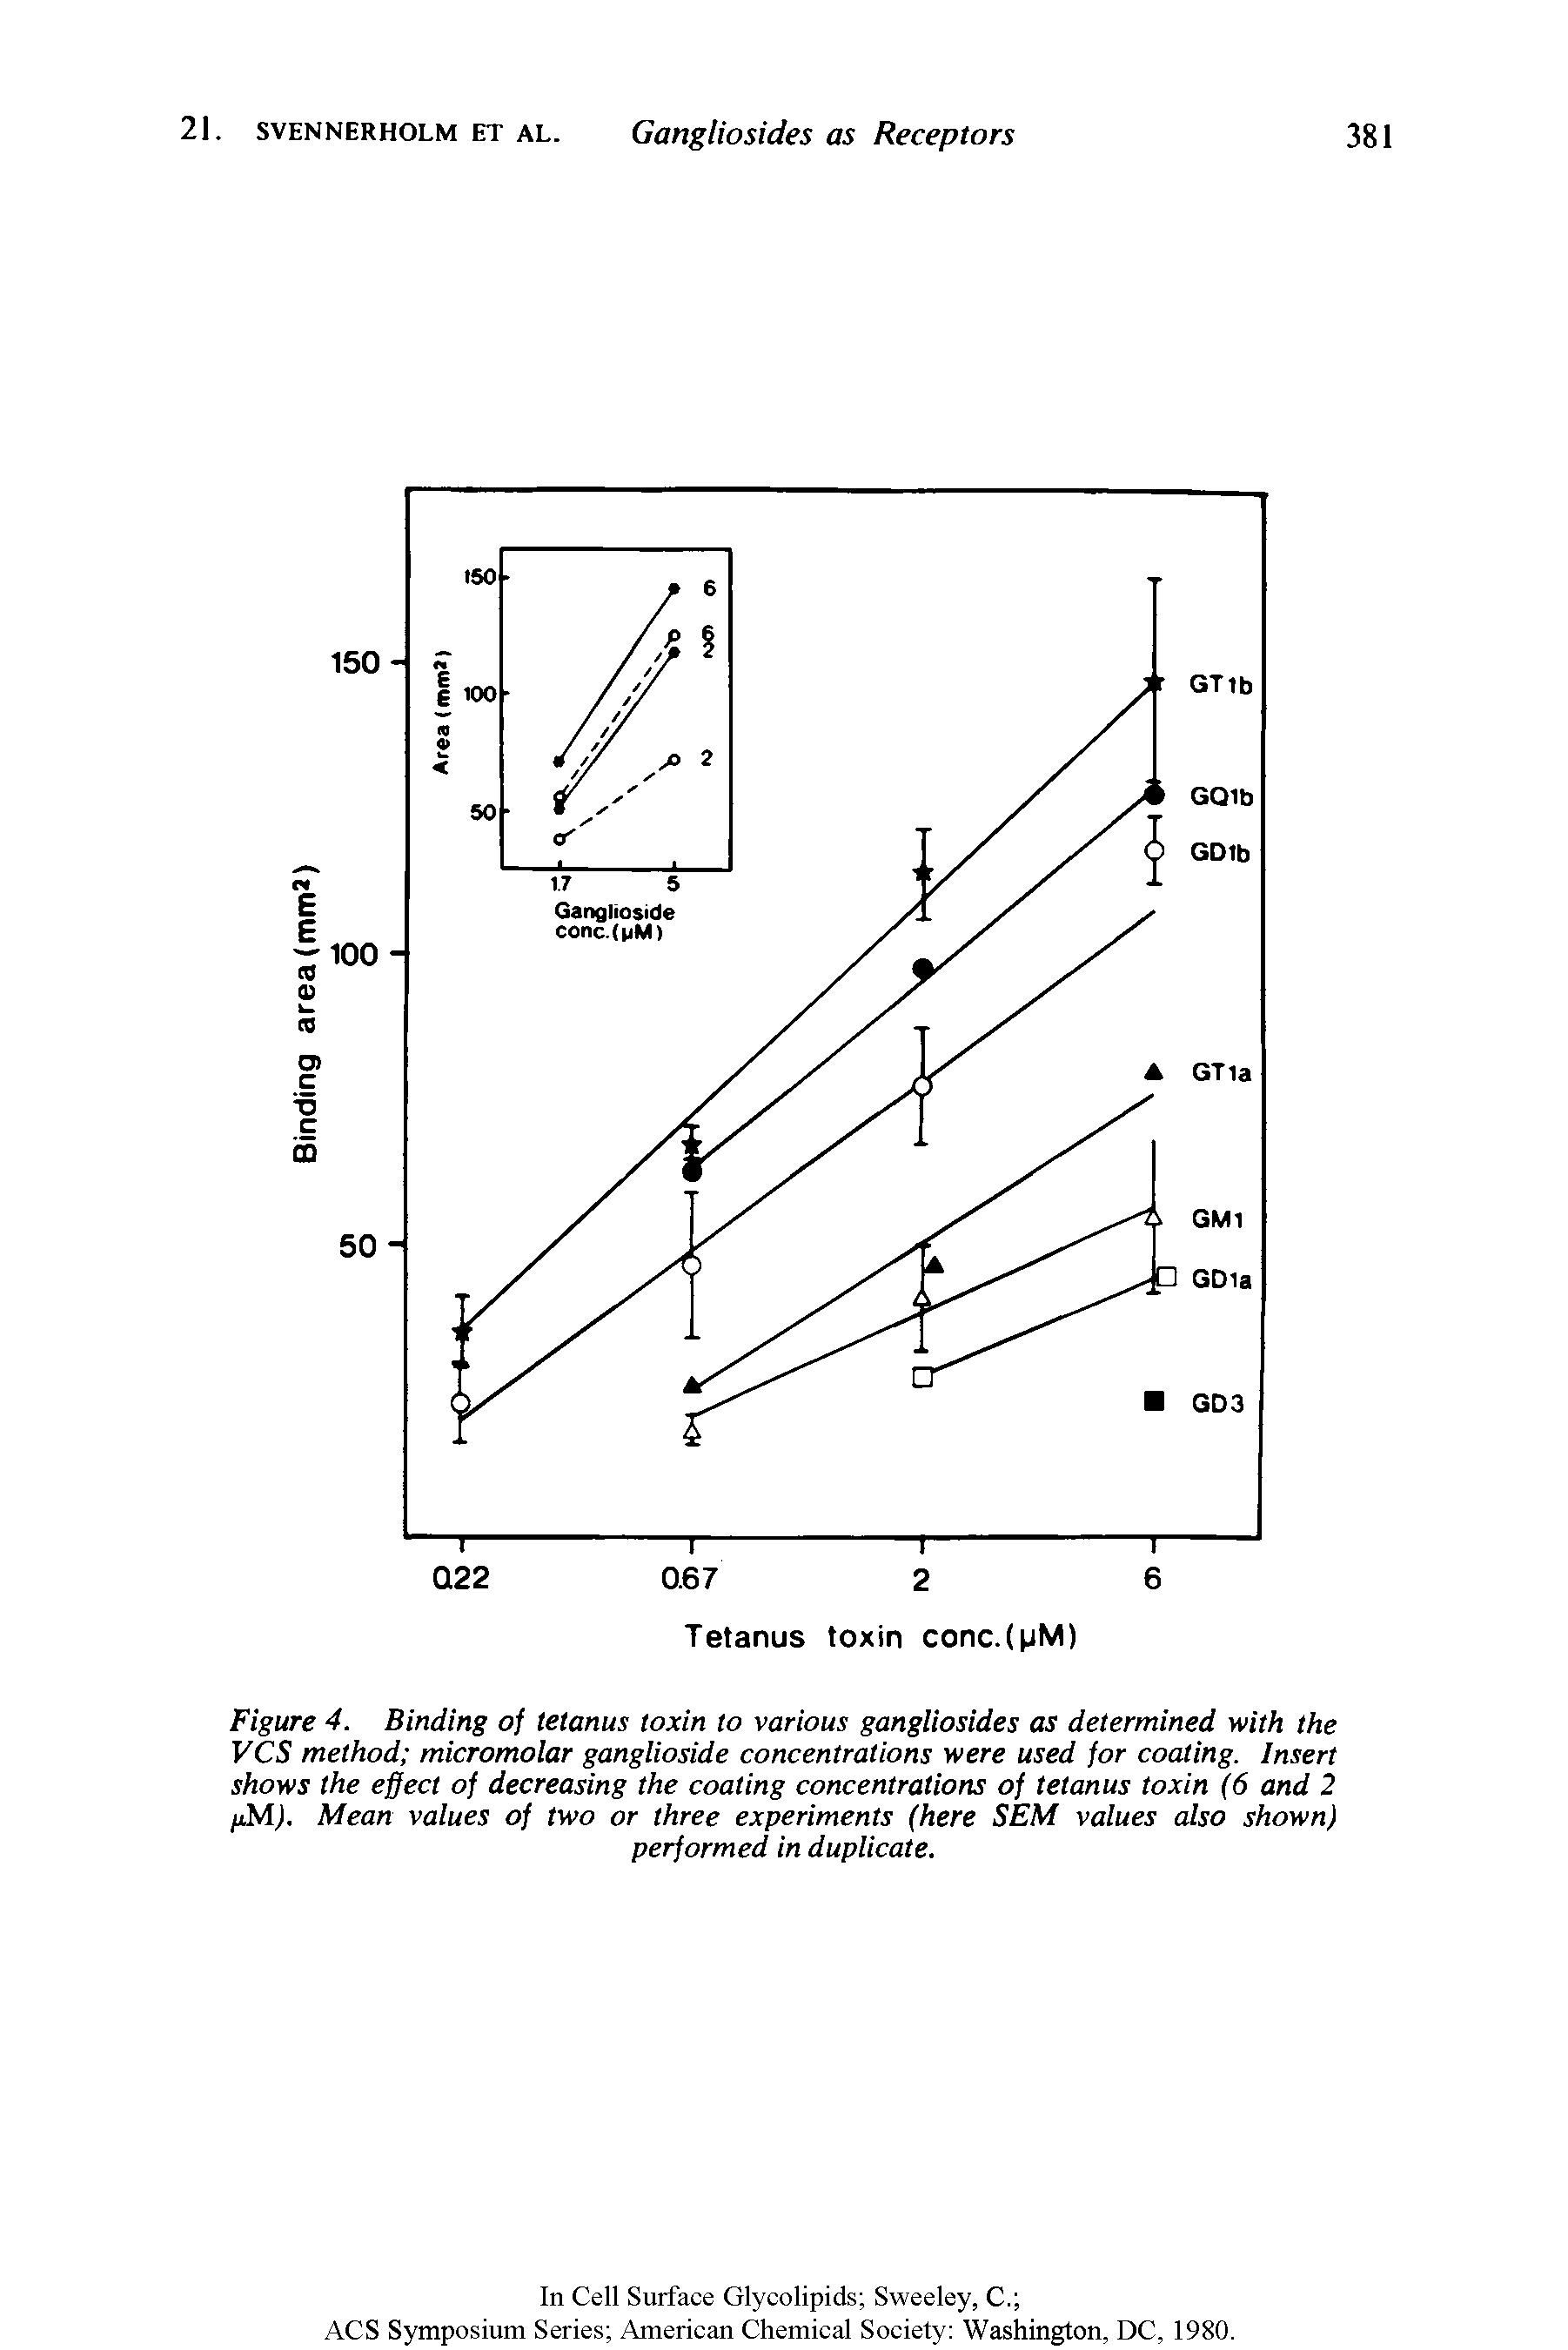 Figure 4. Binding of tetanus toxin to various gangliosides as determined with the VCS method micromolar ganglioside concentrations were used for coating. Insert shows the effect of decreasing the coating concentrations of tetanus toxin (6 and 2 /iMJ. Mean values of two or three experiments (here SEM values also shown)...